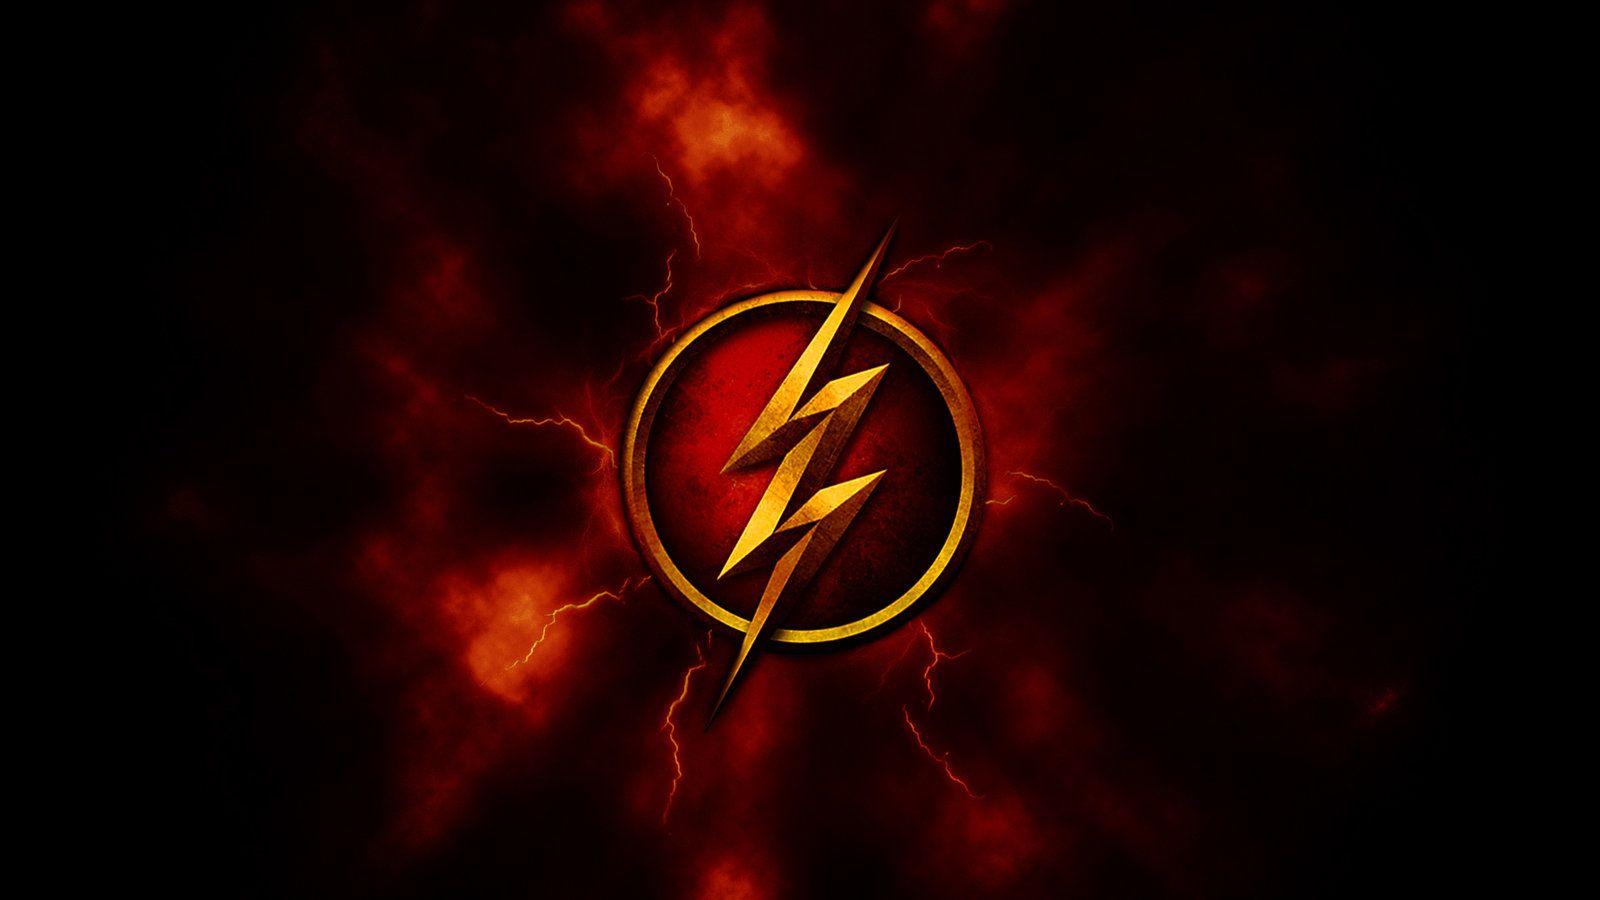 the flash background HD 5. Background Check All